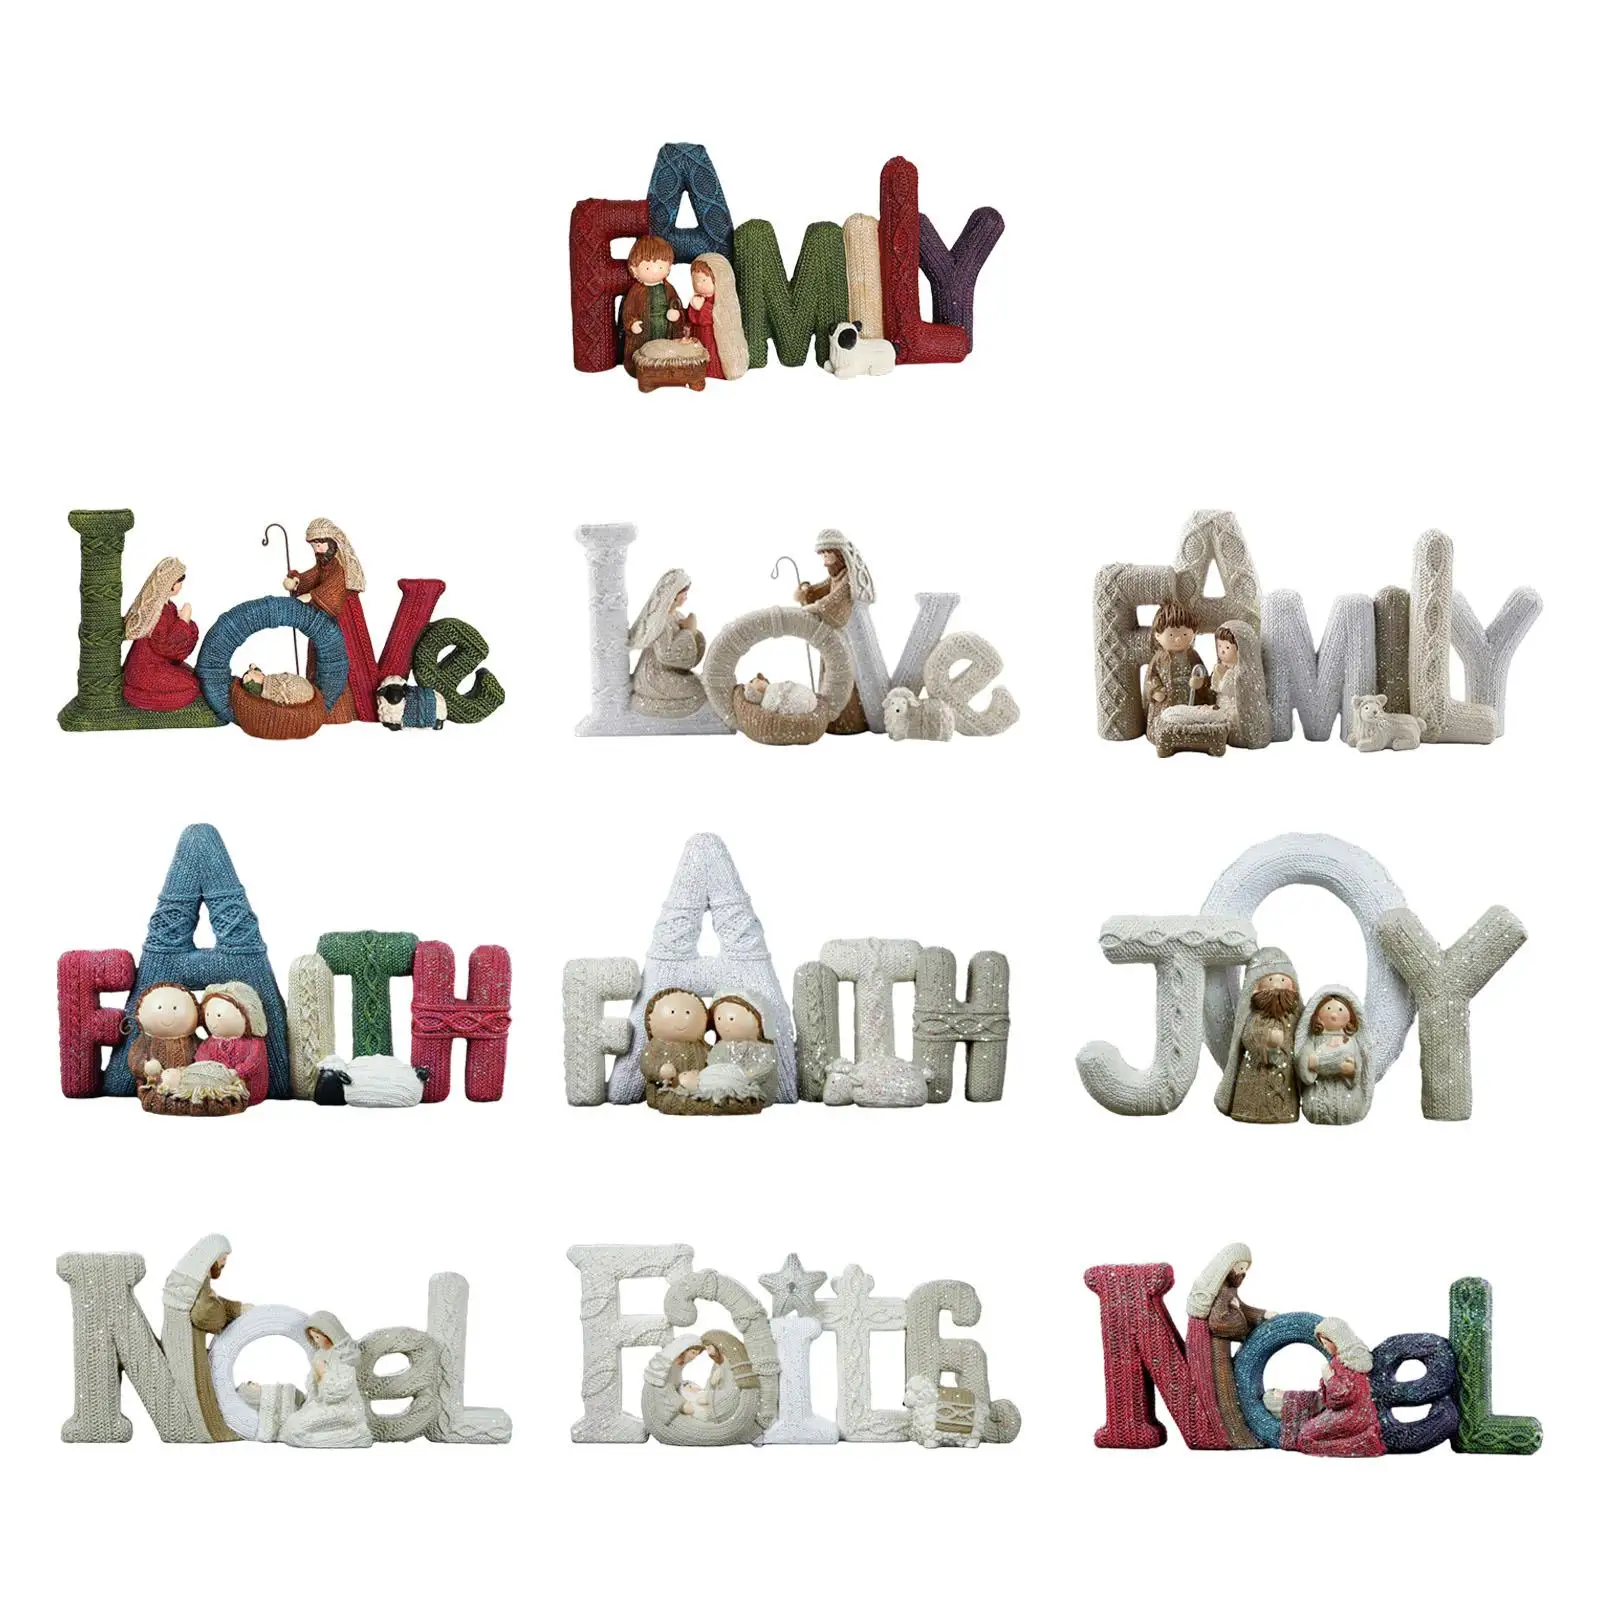 Alphabet Ornaments Table Decor Festival Wedding Decoration Table Centerpiece Crafts Holiday Gifts European Collectible Figurine